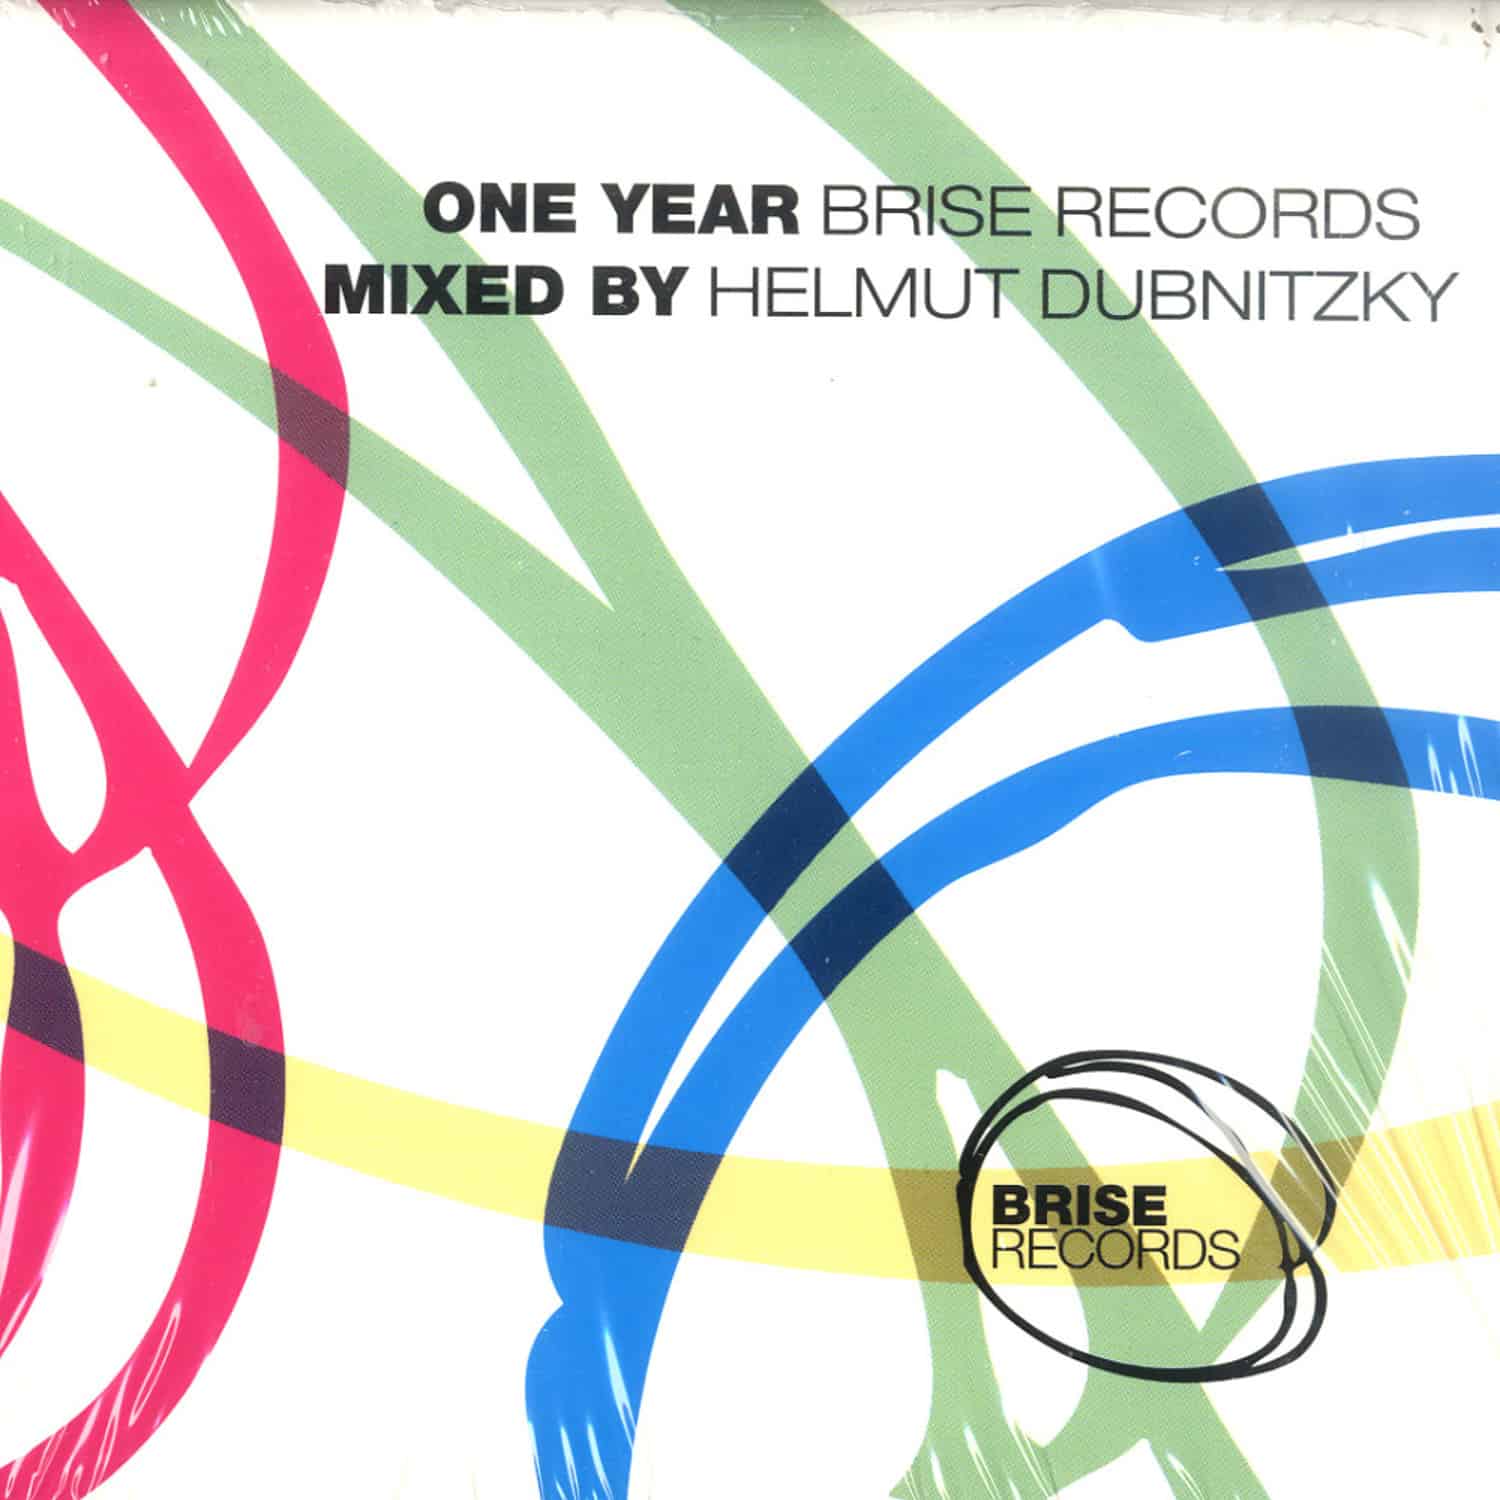 V/A mixed by Helmut Dubnitzky - ONE YEAR BRISE RECORDS 